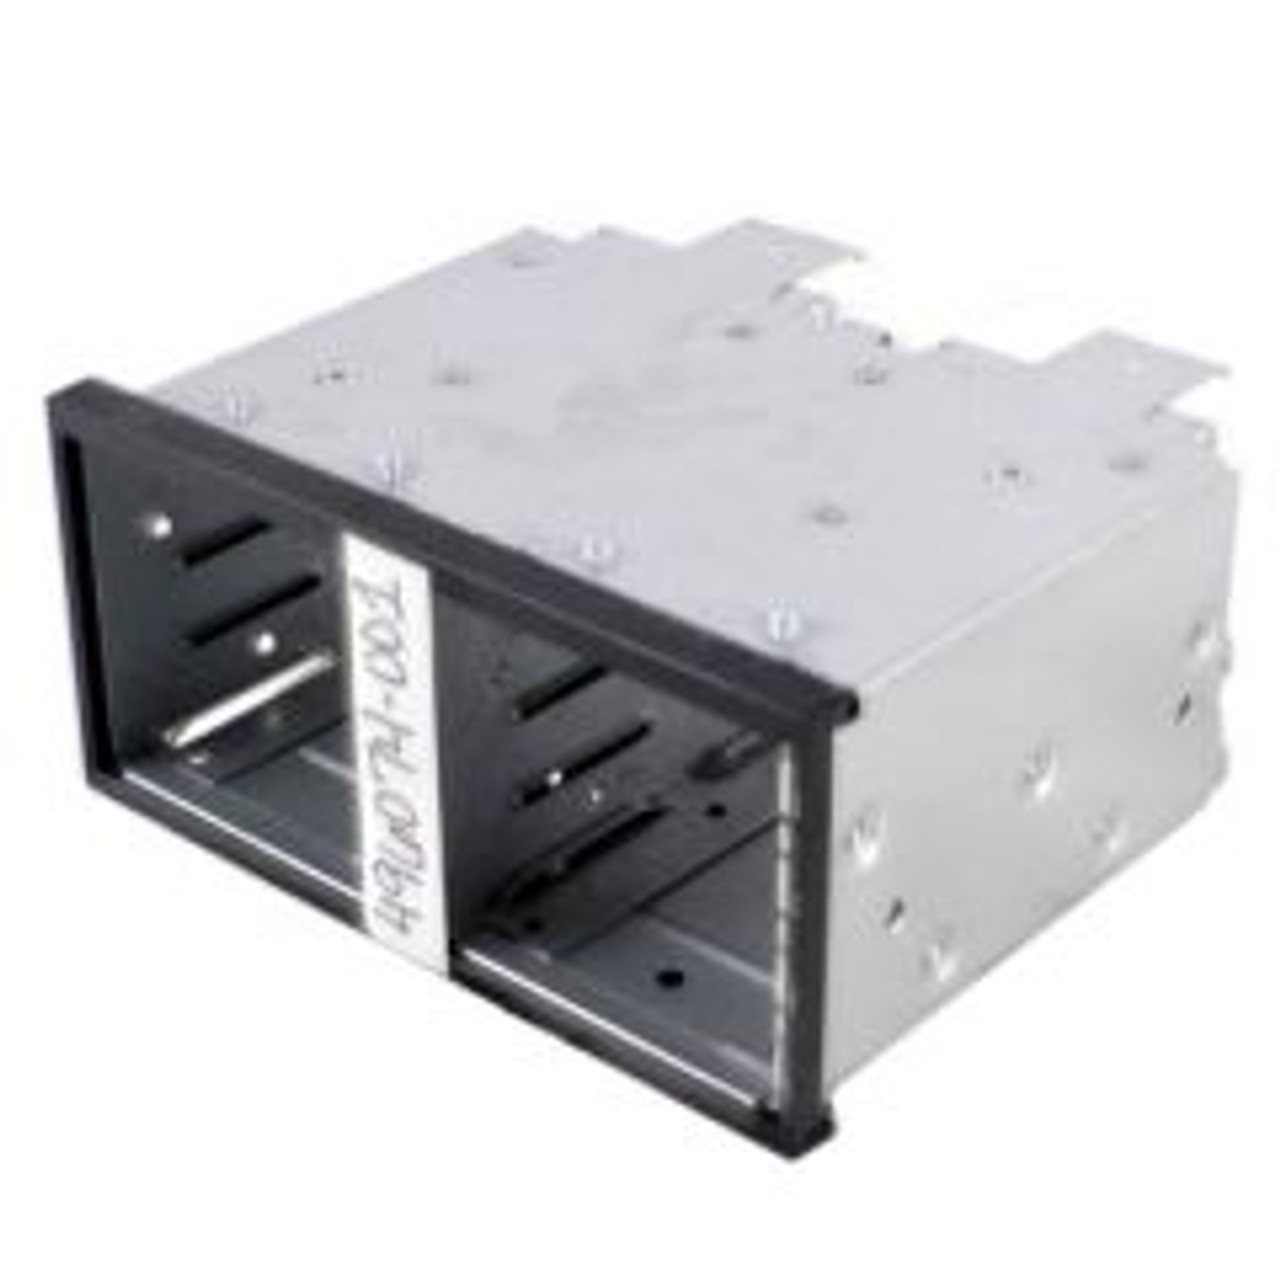 463173-001 | HP | 8-Slot SFF 2.5-inch Hard Drive Cage Storage Enclosure for HP DL380 G6 Server